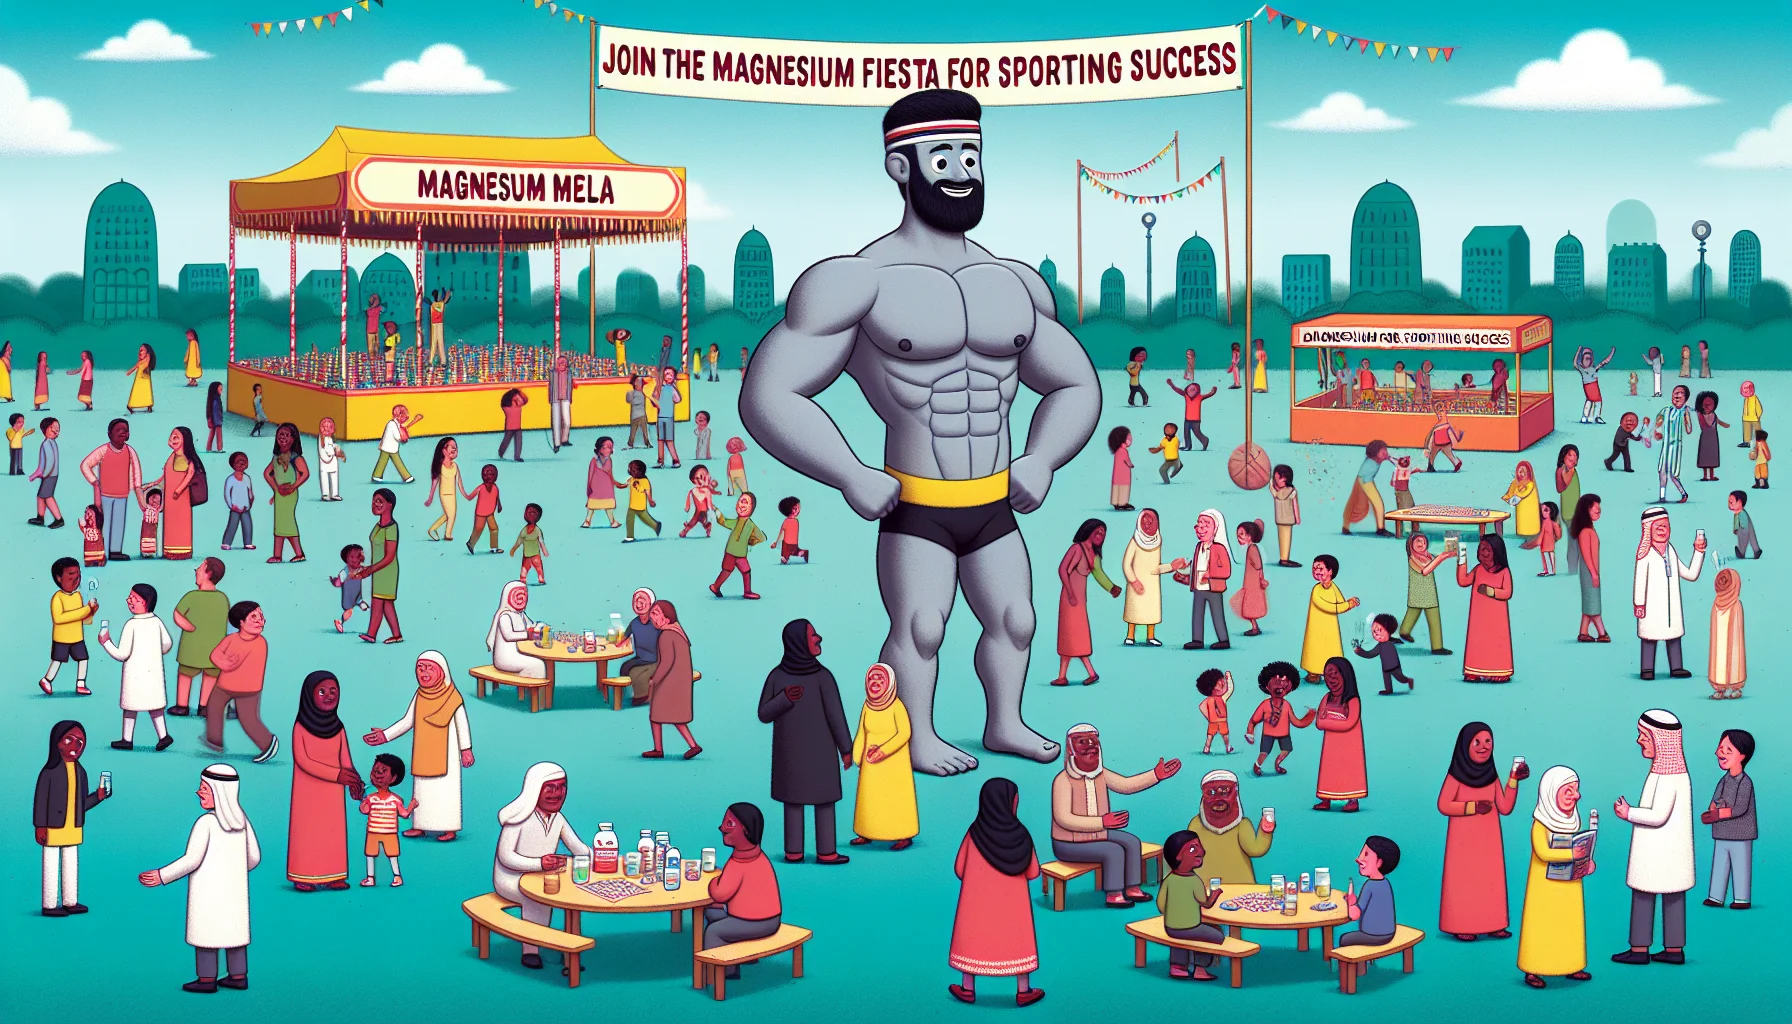 Imagine a humorous scenario where an inanimate magnesium supplement is personified. This character has Caucasian descent with exaggerated muscular features to represent its benefits for sports. It is hosting a lively 'mela' or traditional fair. The fairground is bustling with diverse community of people including black, Hispanic, South Asian and middle-eastern people, all engrossed in various playful activities and games. Banner hanging across the fair reads, 'Join the Magnesium Fiesta for Sporting Success'. Everywhere there are hints about magnesium's role in enhancing sports performance, represented in a light-hearted, captivating manner.